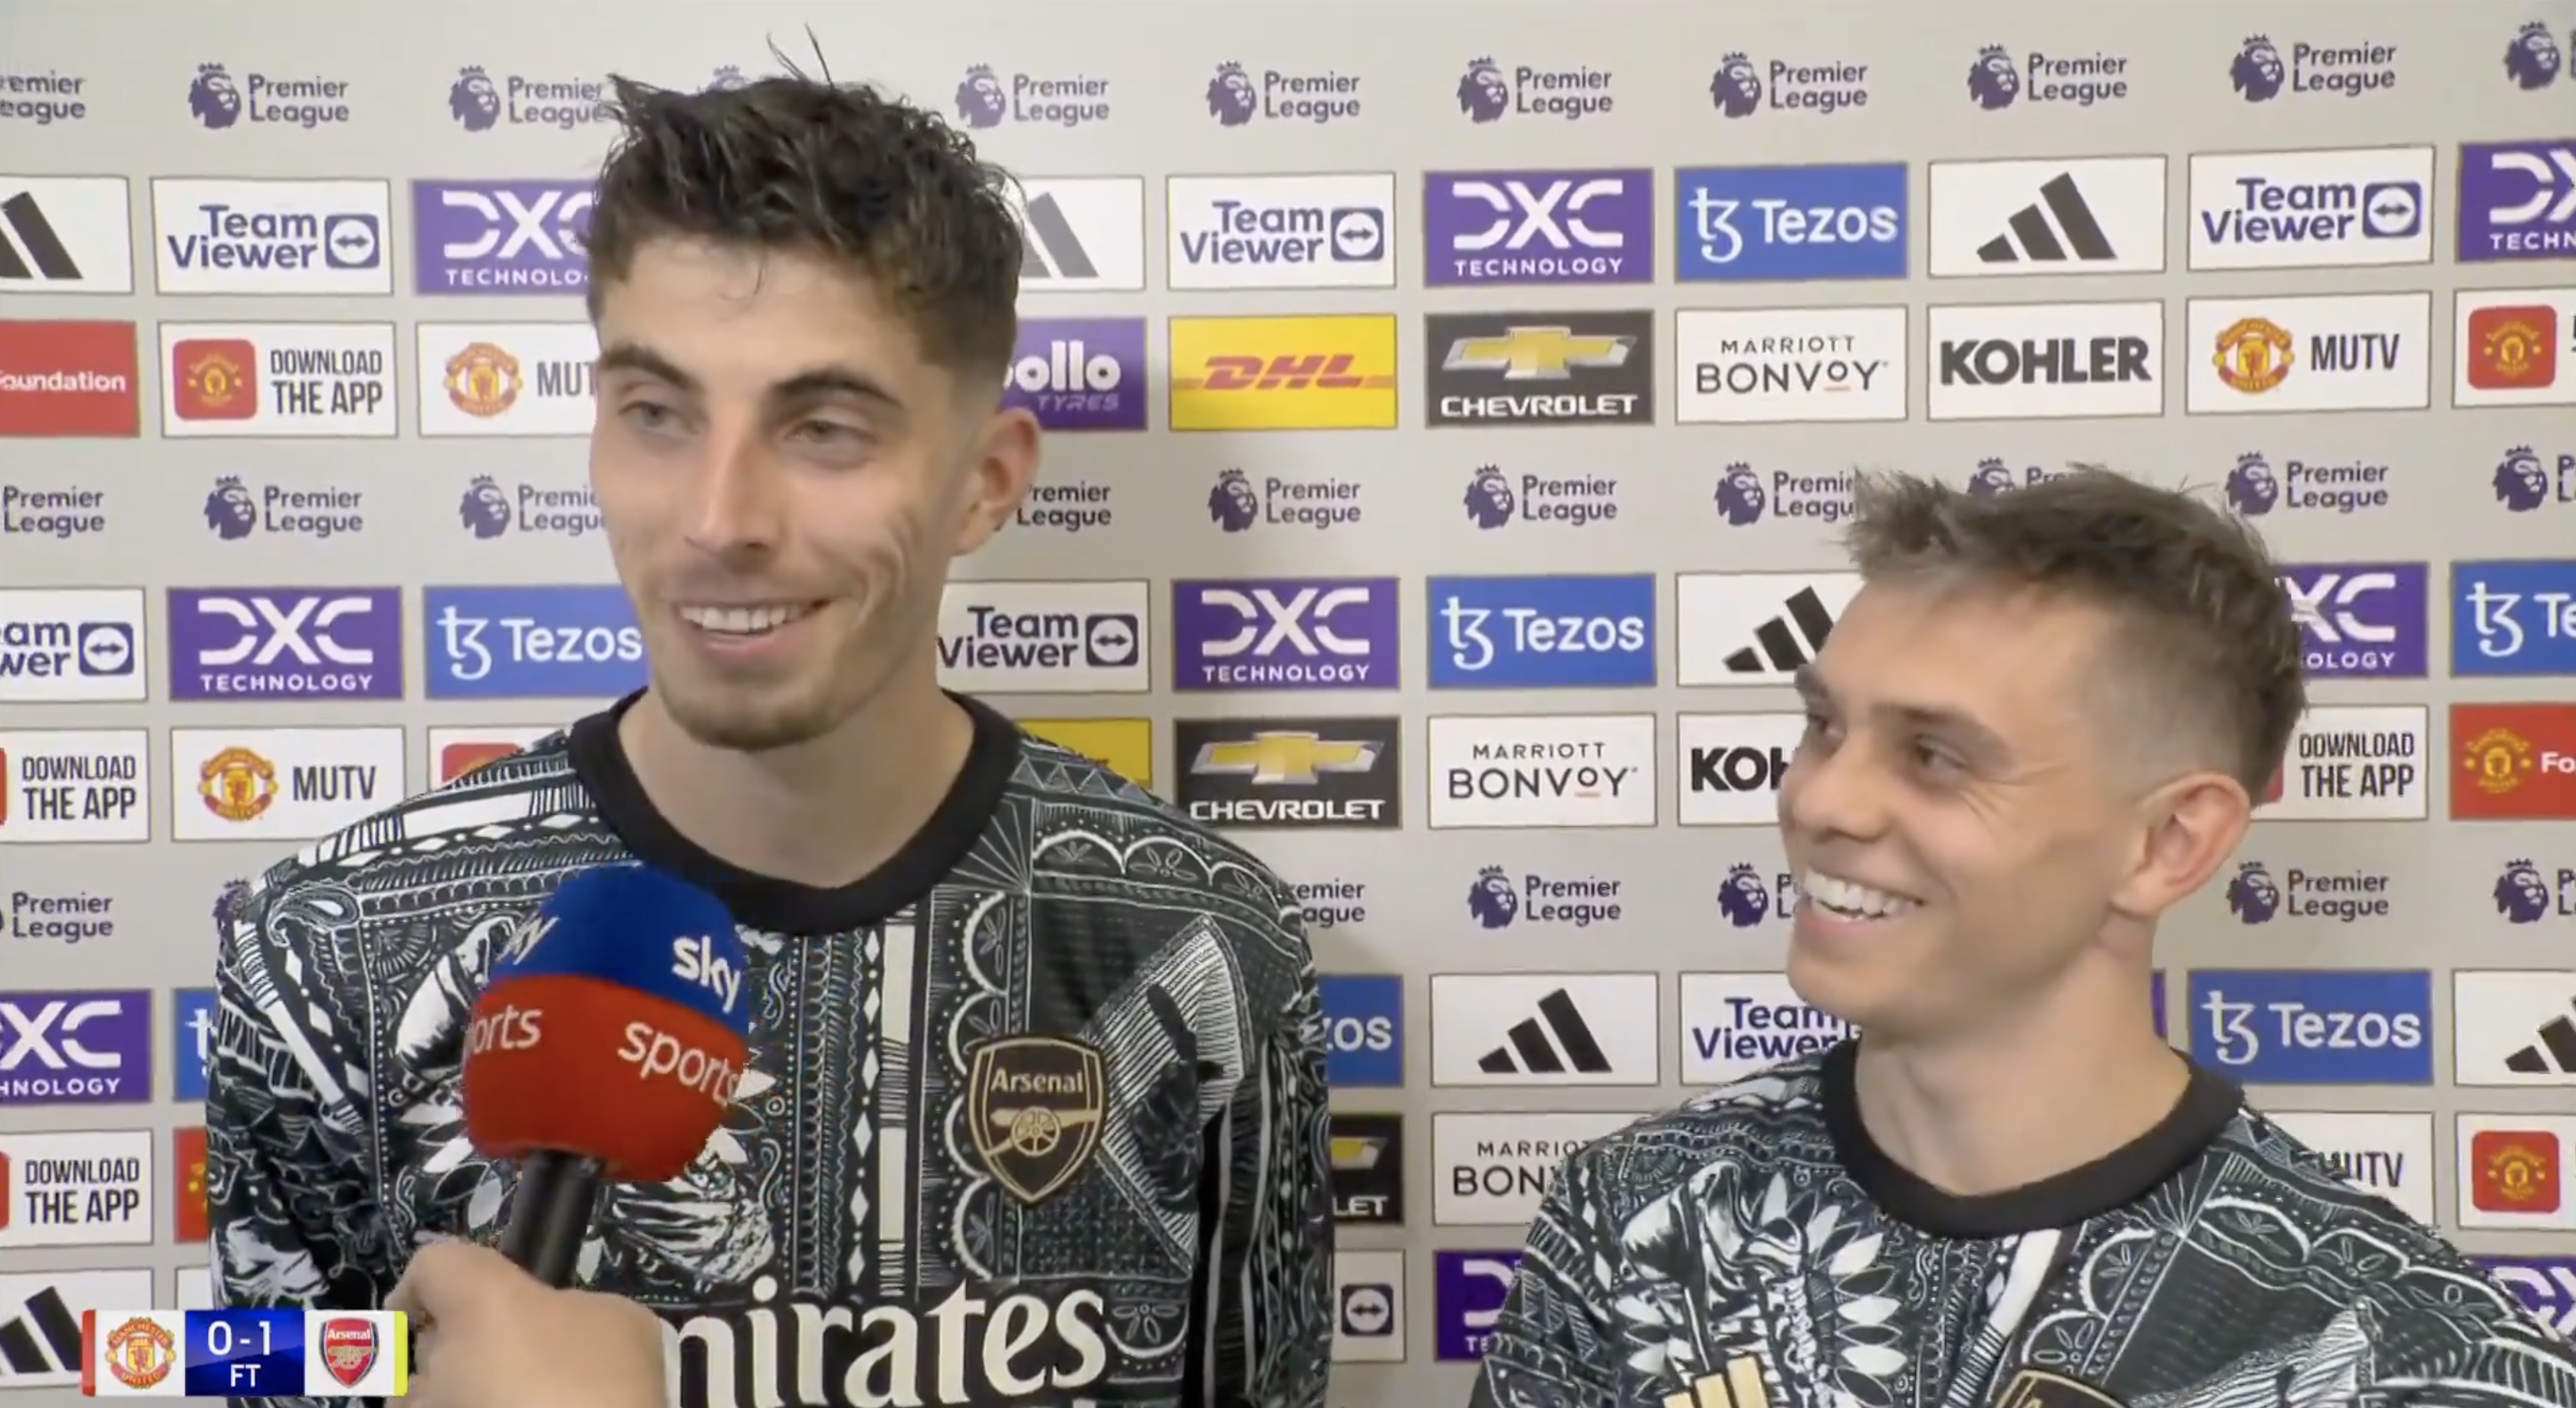 Video: Kai Havertz states he’s going to be the “biggest Tottenham fan ever” on Tuesday evening